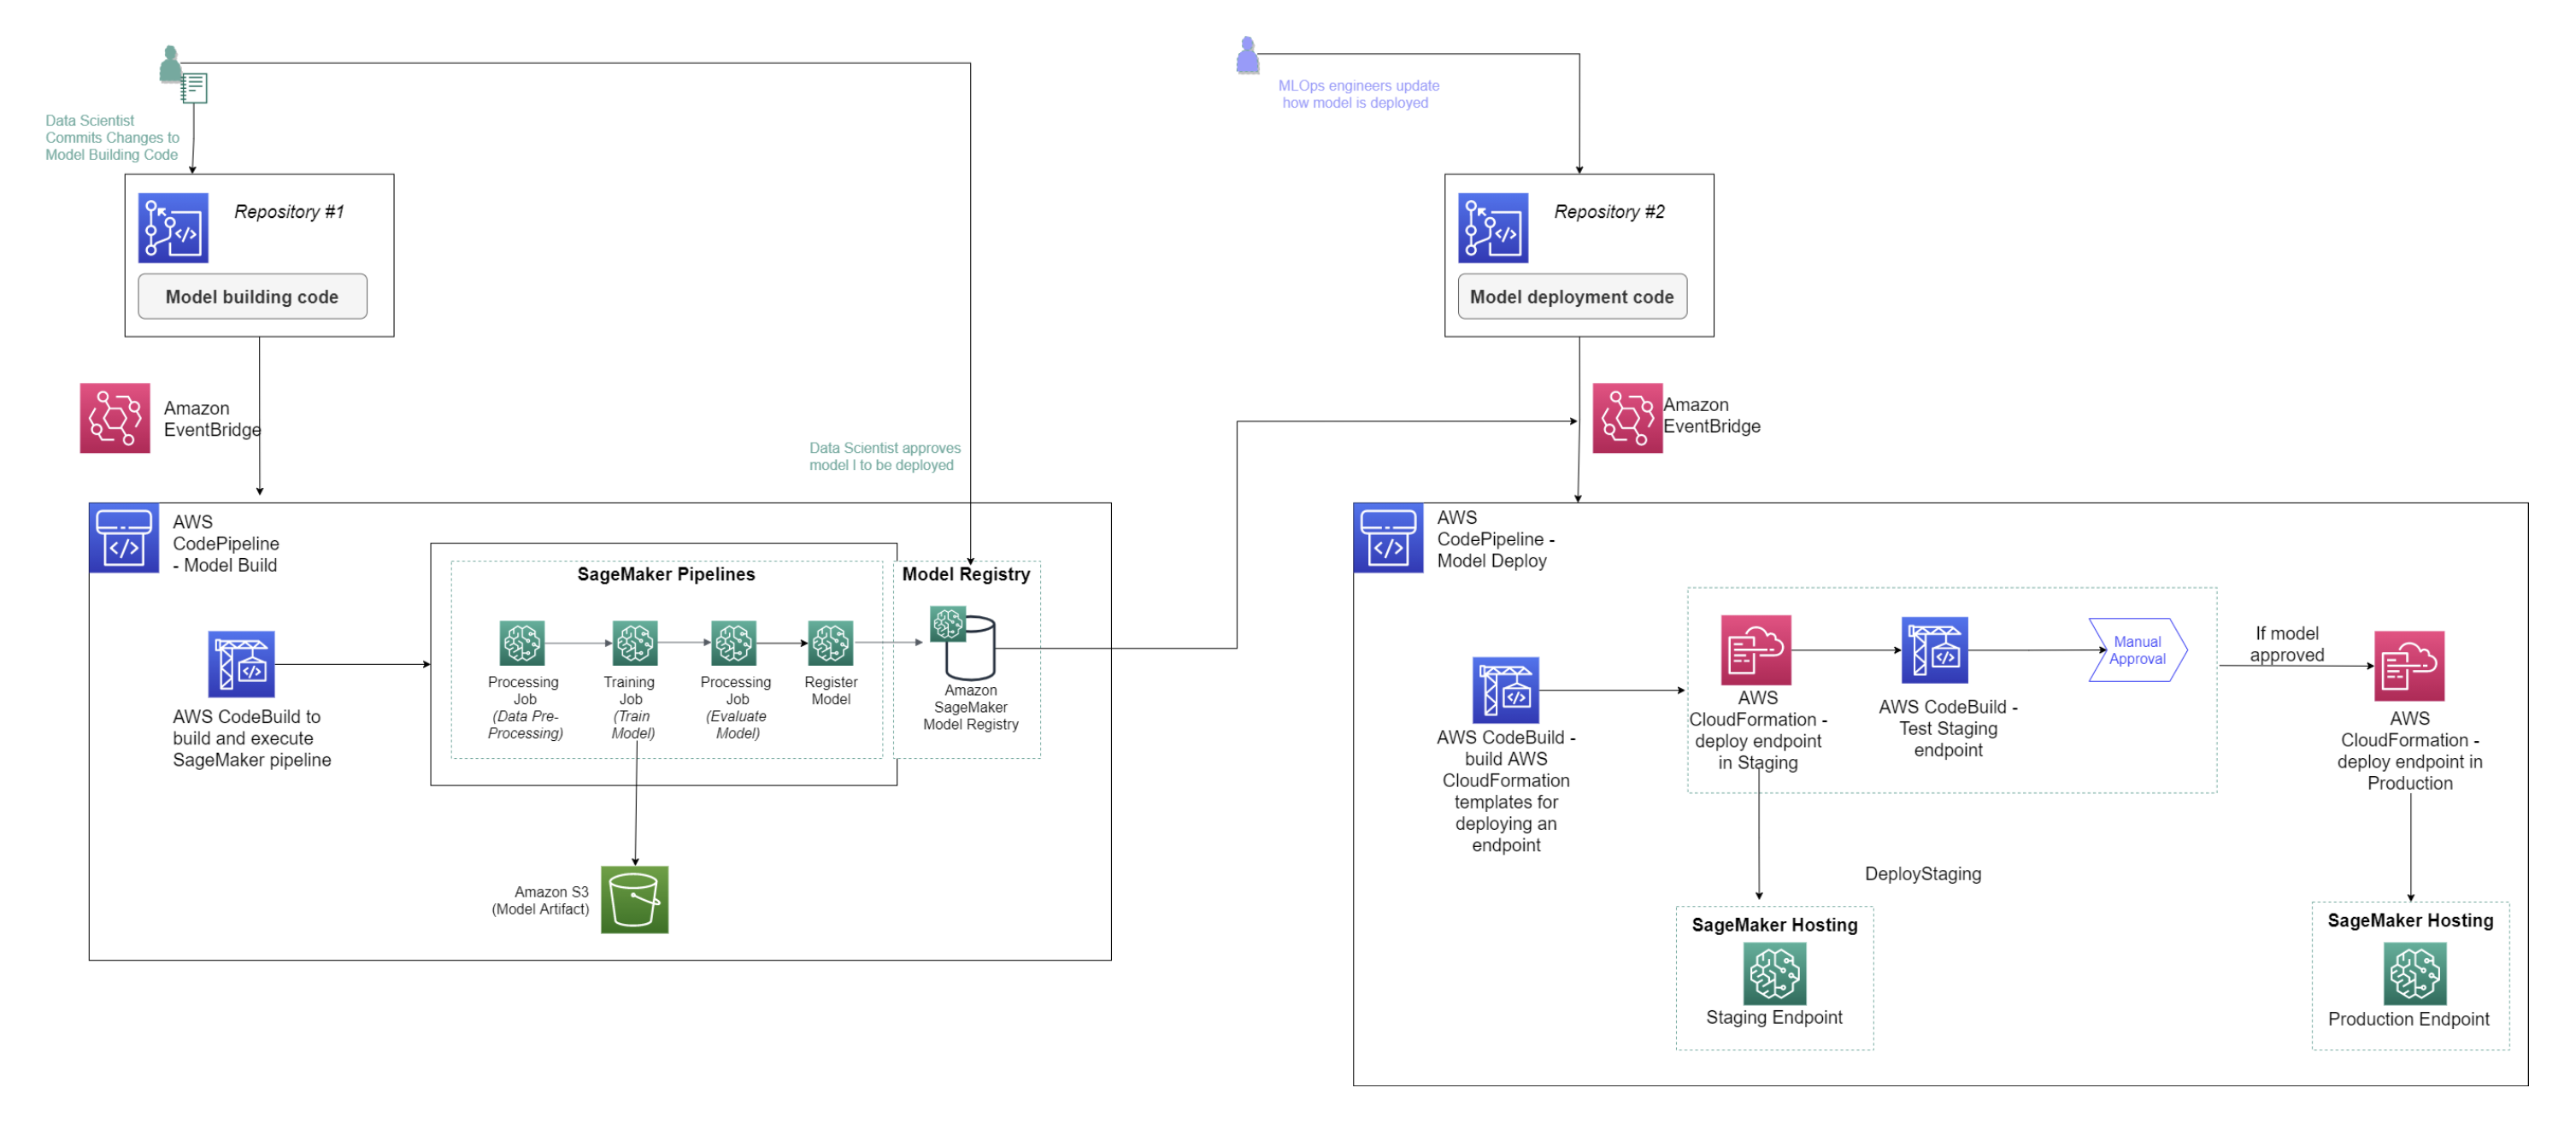 A ML workflow diagram for a pipeline that includes model training and deployment steps.